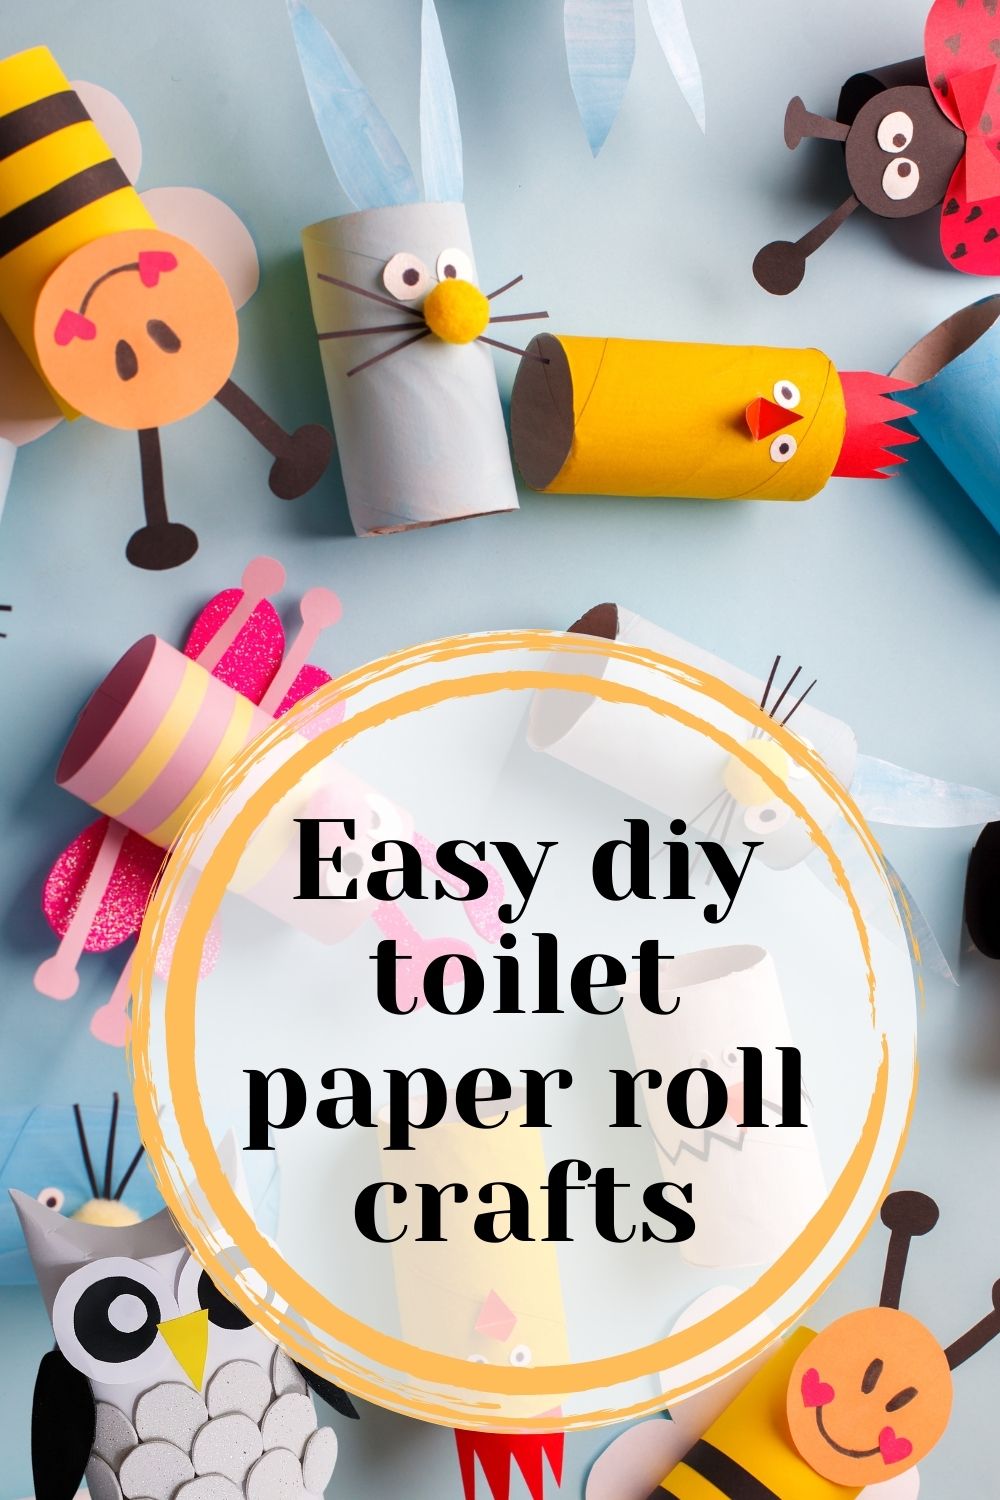 Easy diy toilet paper roll crafts